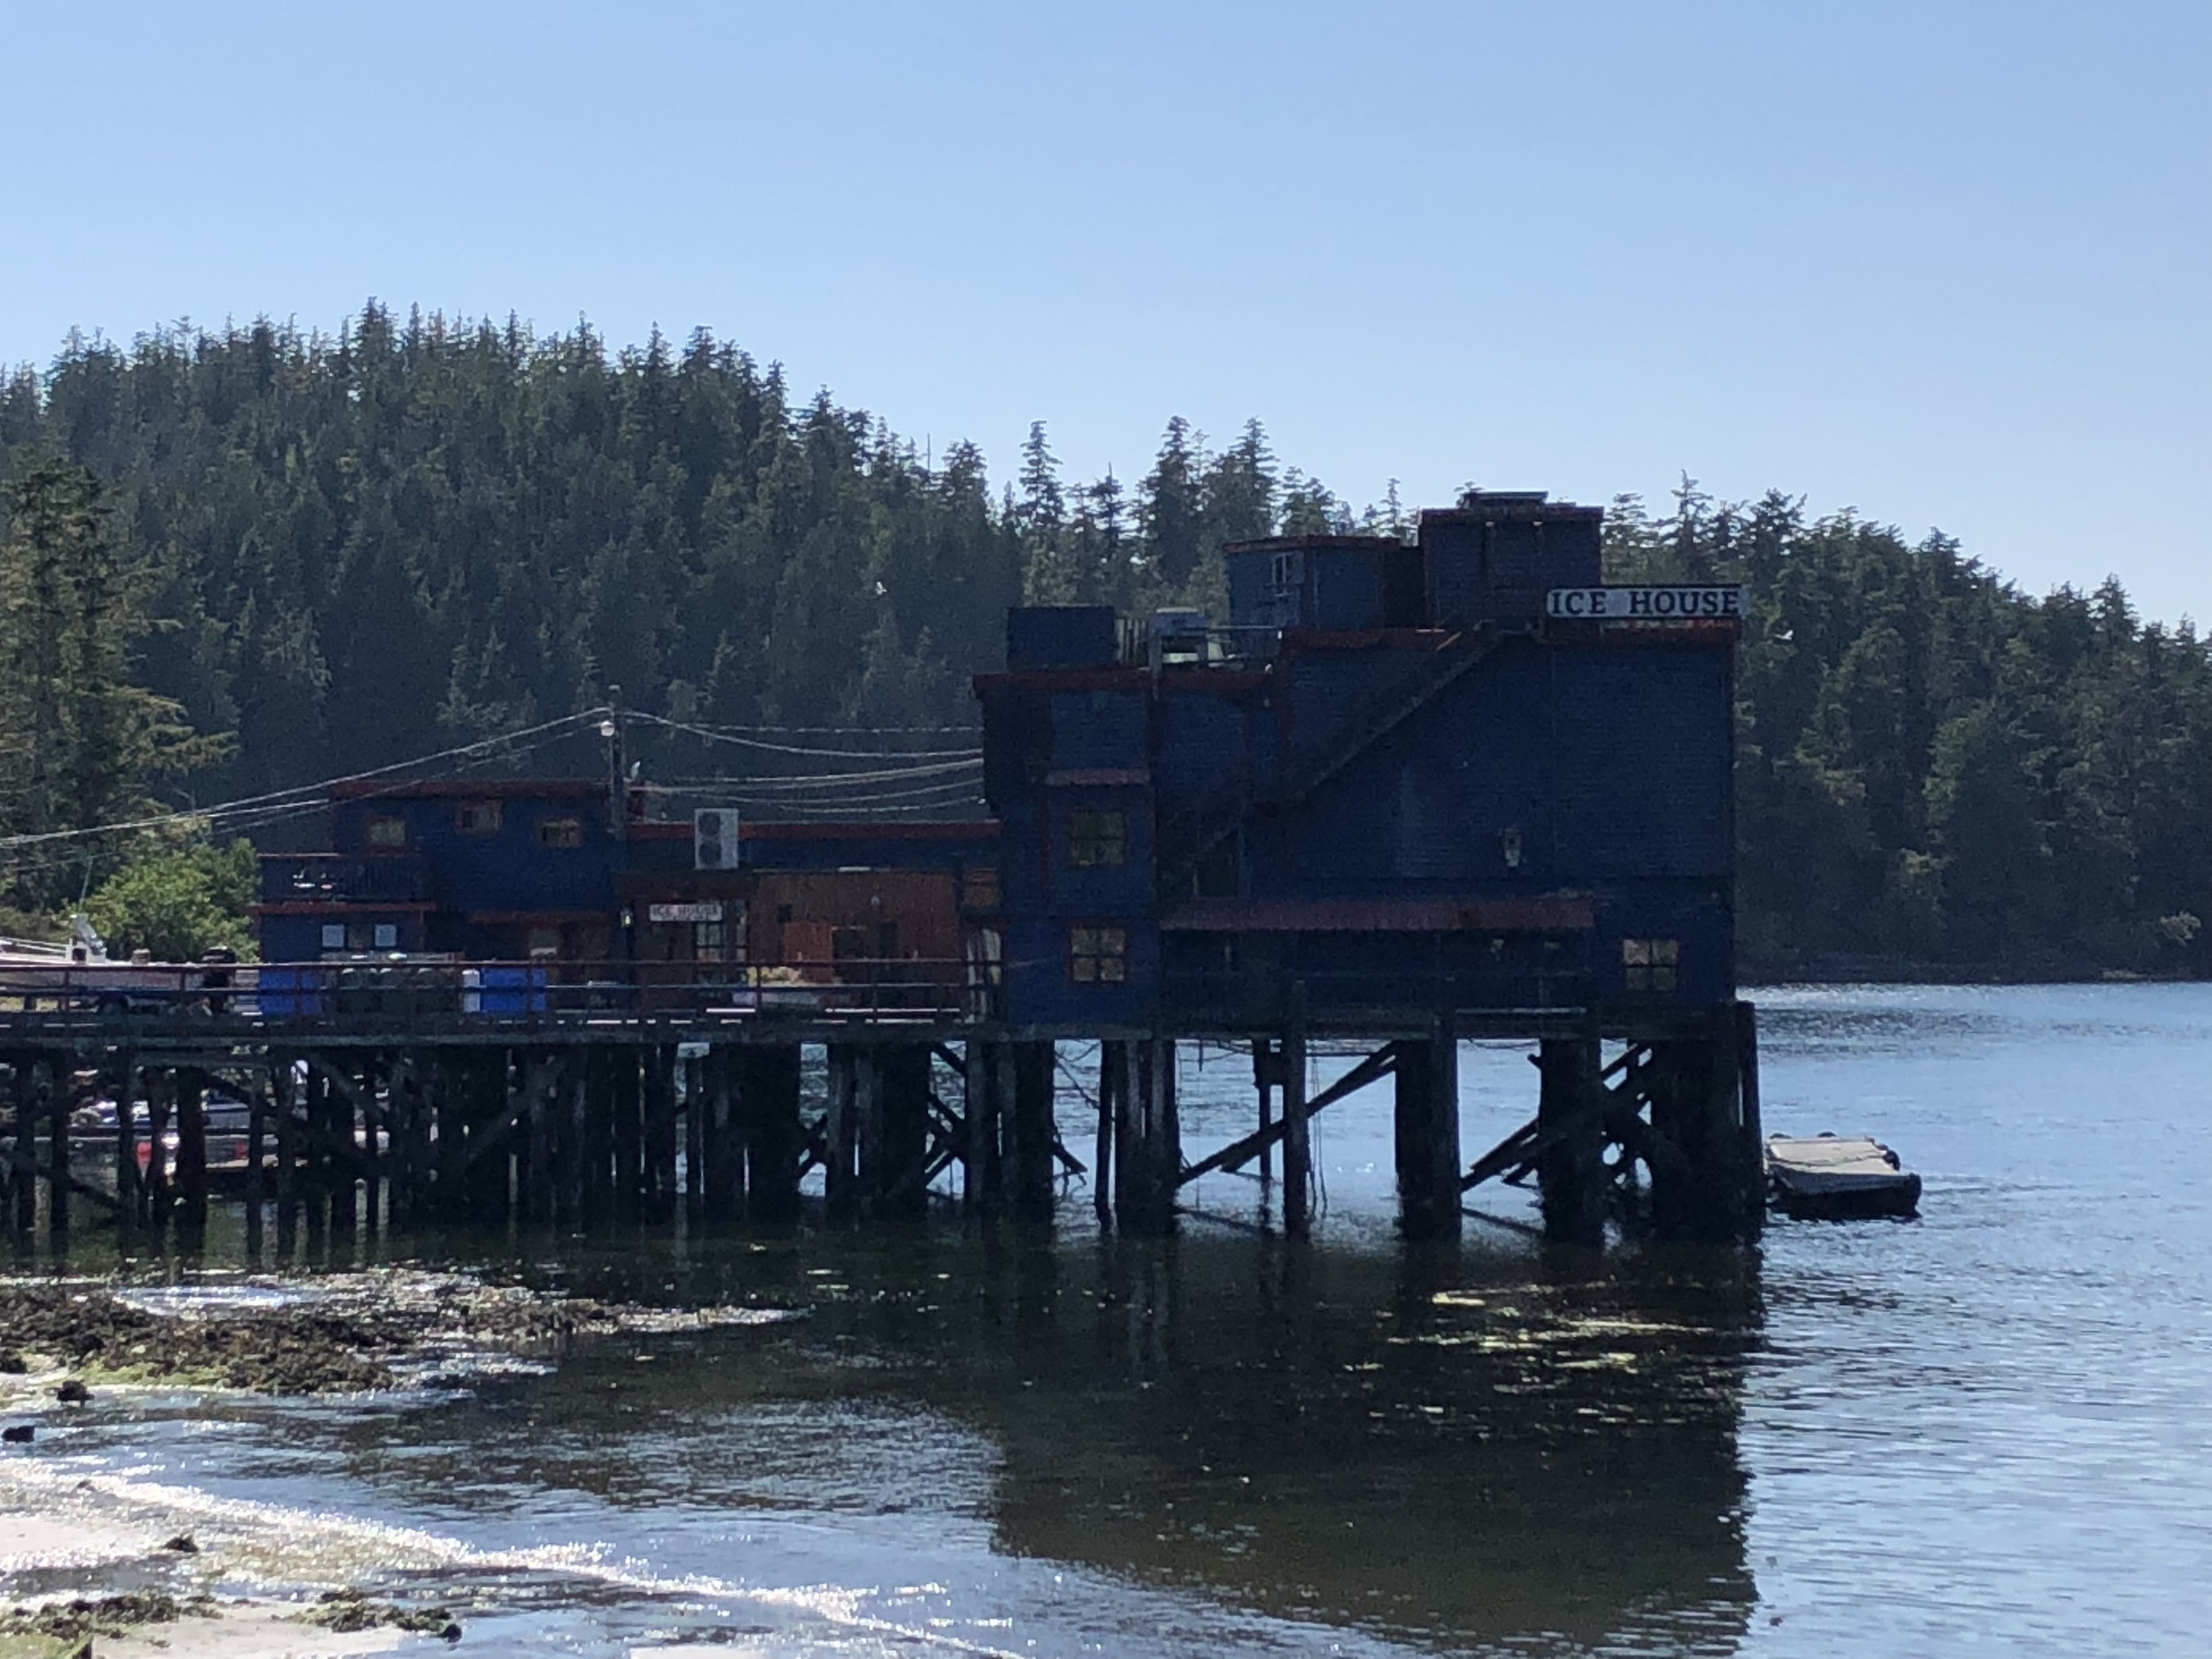 Icehouse sits on pilings over water